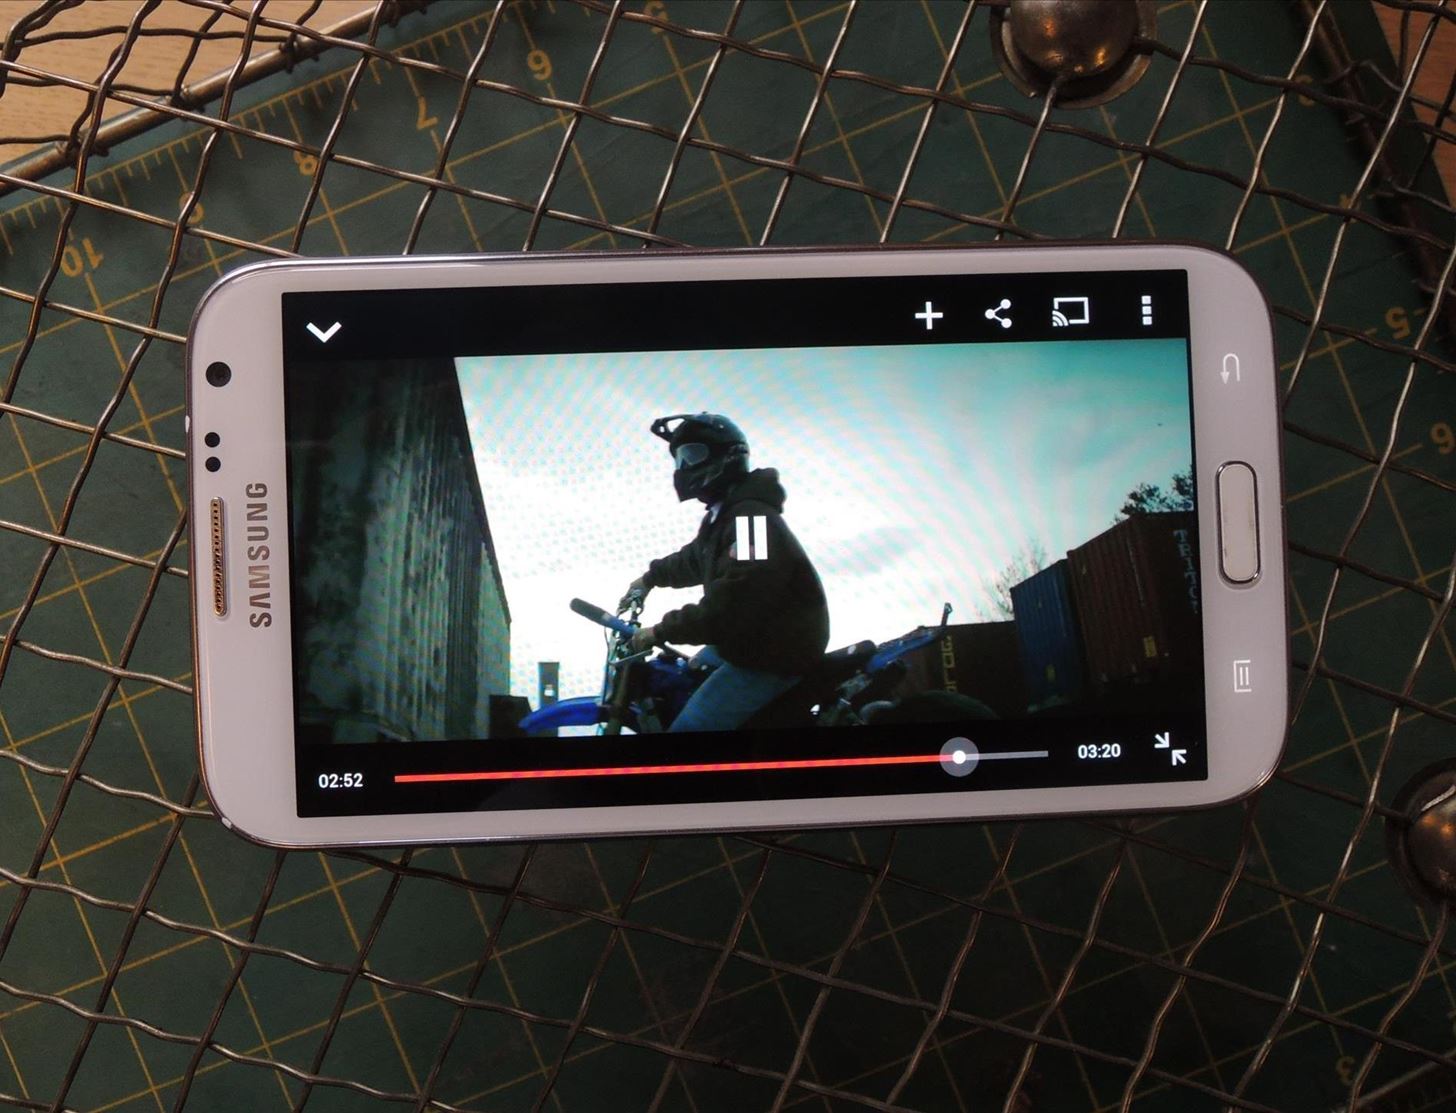 How to Remove Ads When Watching Videos in the YouTube App on Your Galaxy Note 2